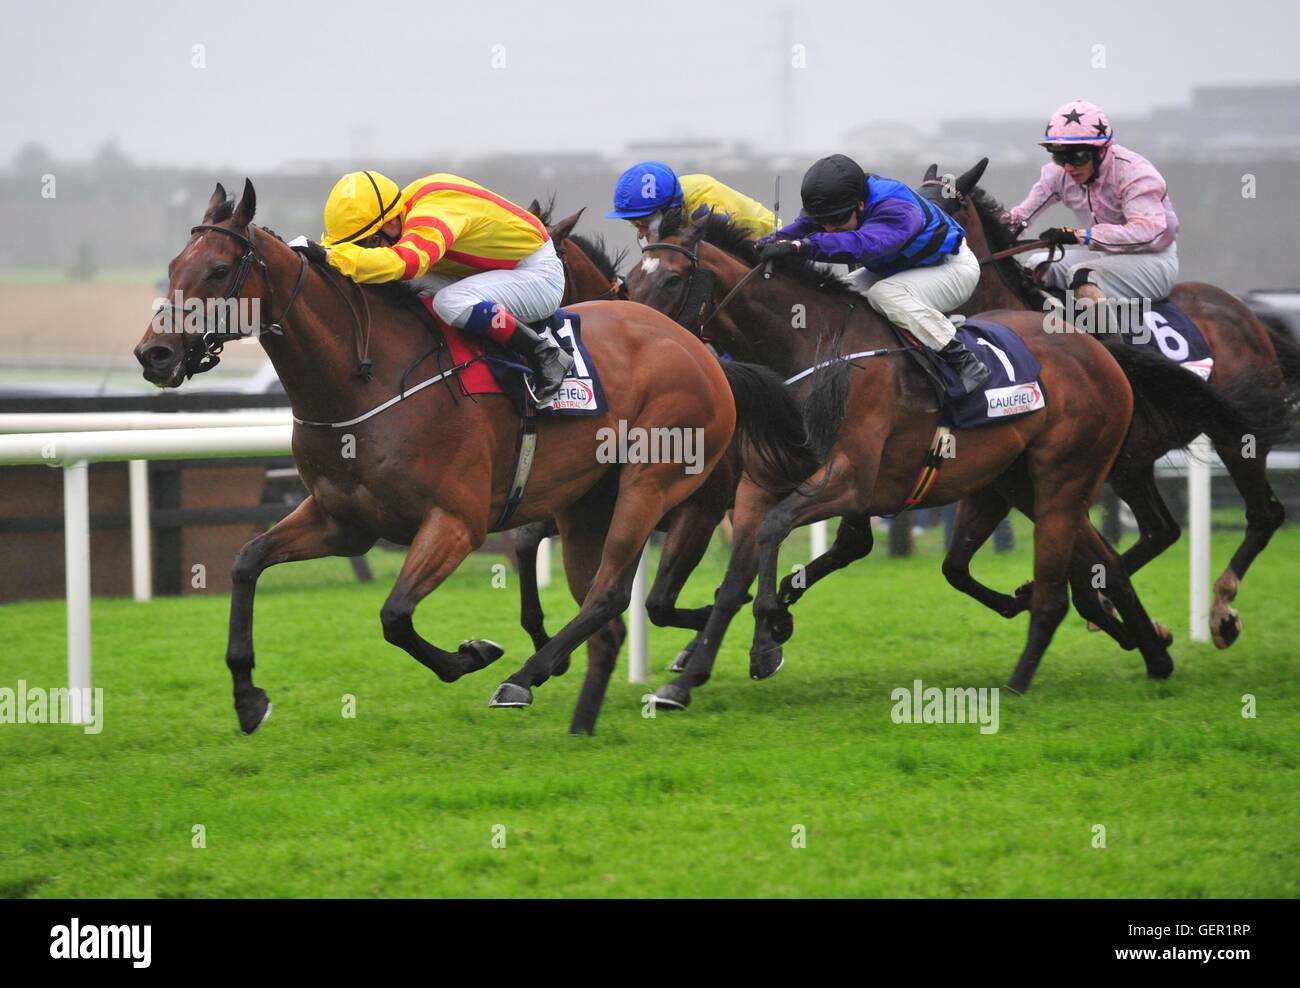 Beau Satchel ridden by Declan McDonogh wins the Caulfield Industrial Handicap during day two of the Galway Festival in Ballybrit, Ireland. Stock Photo